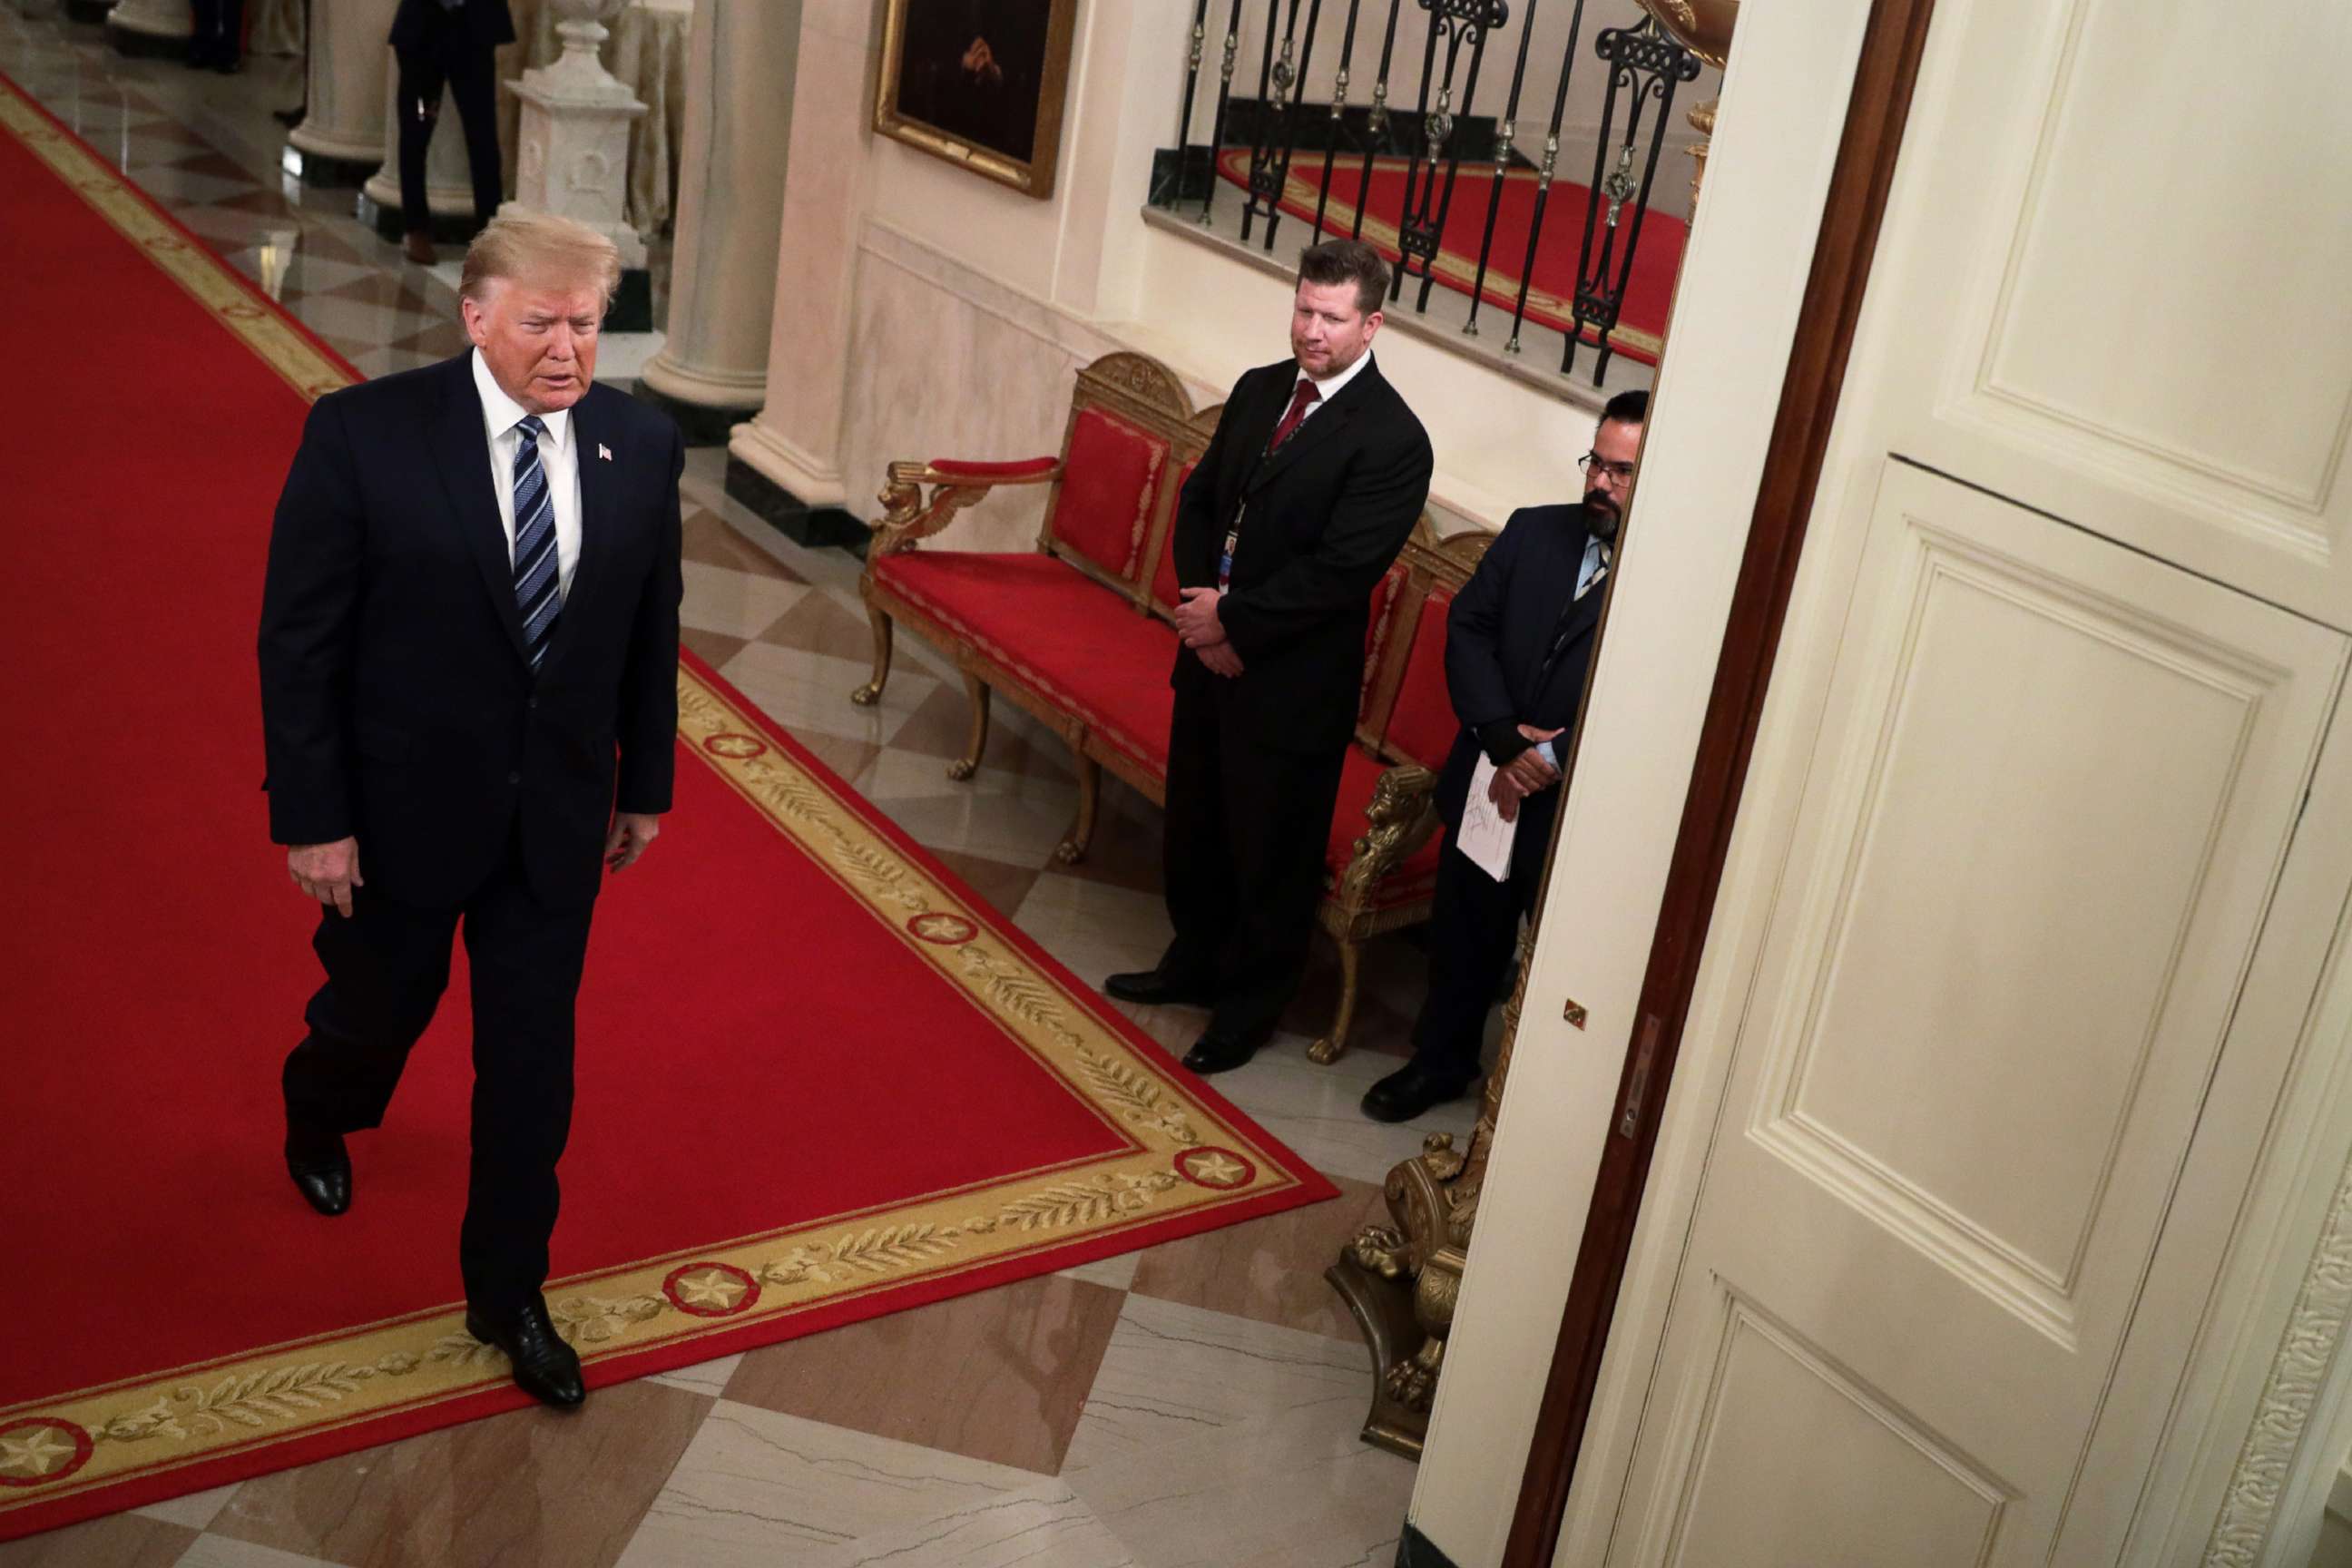 PHOTO: President Donald Trump enters the East Room for an event at the White House in Washington, D.C., Nov. 7, 2019.